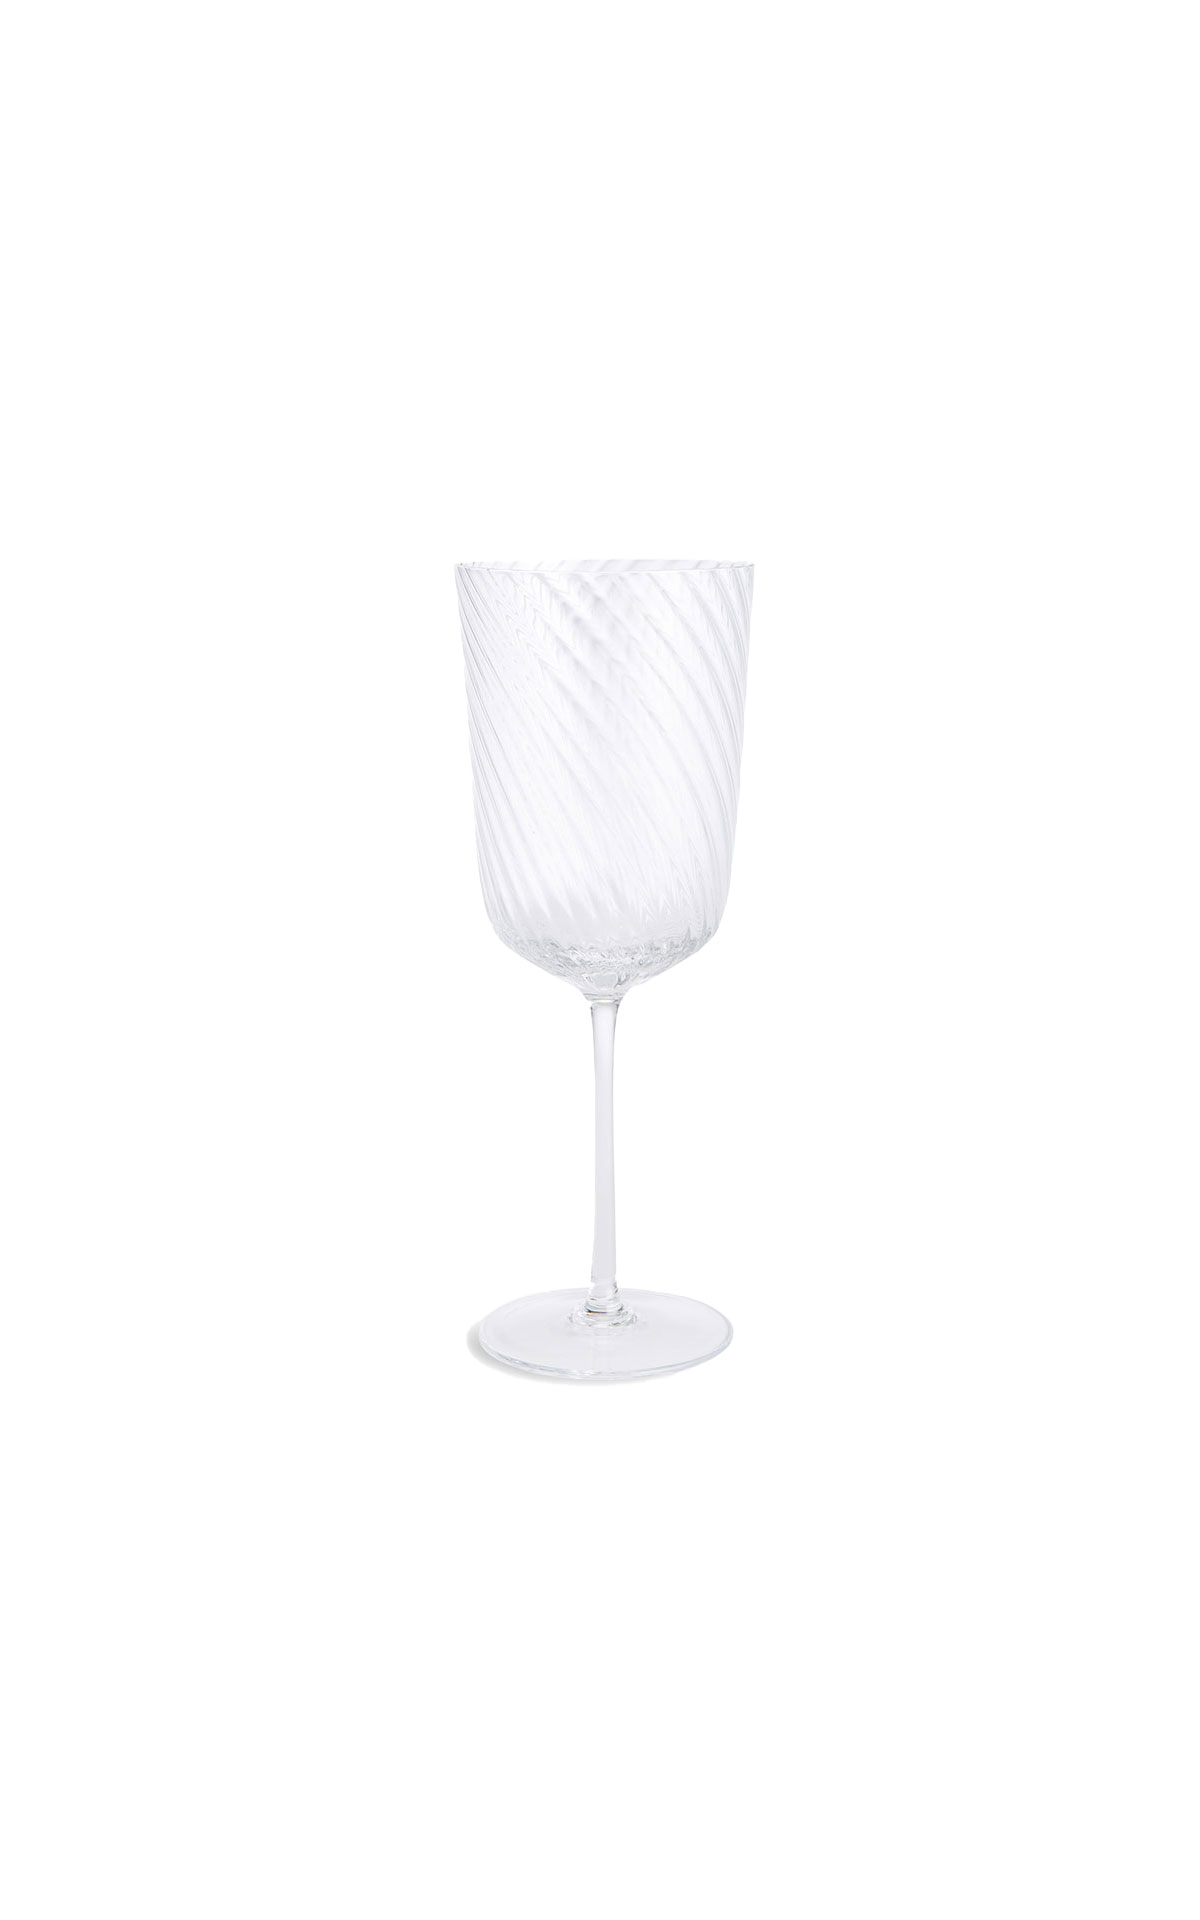 Soho Home Brimbscombe red wine glass (set of 4) from Bicester Village